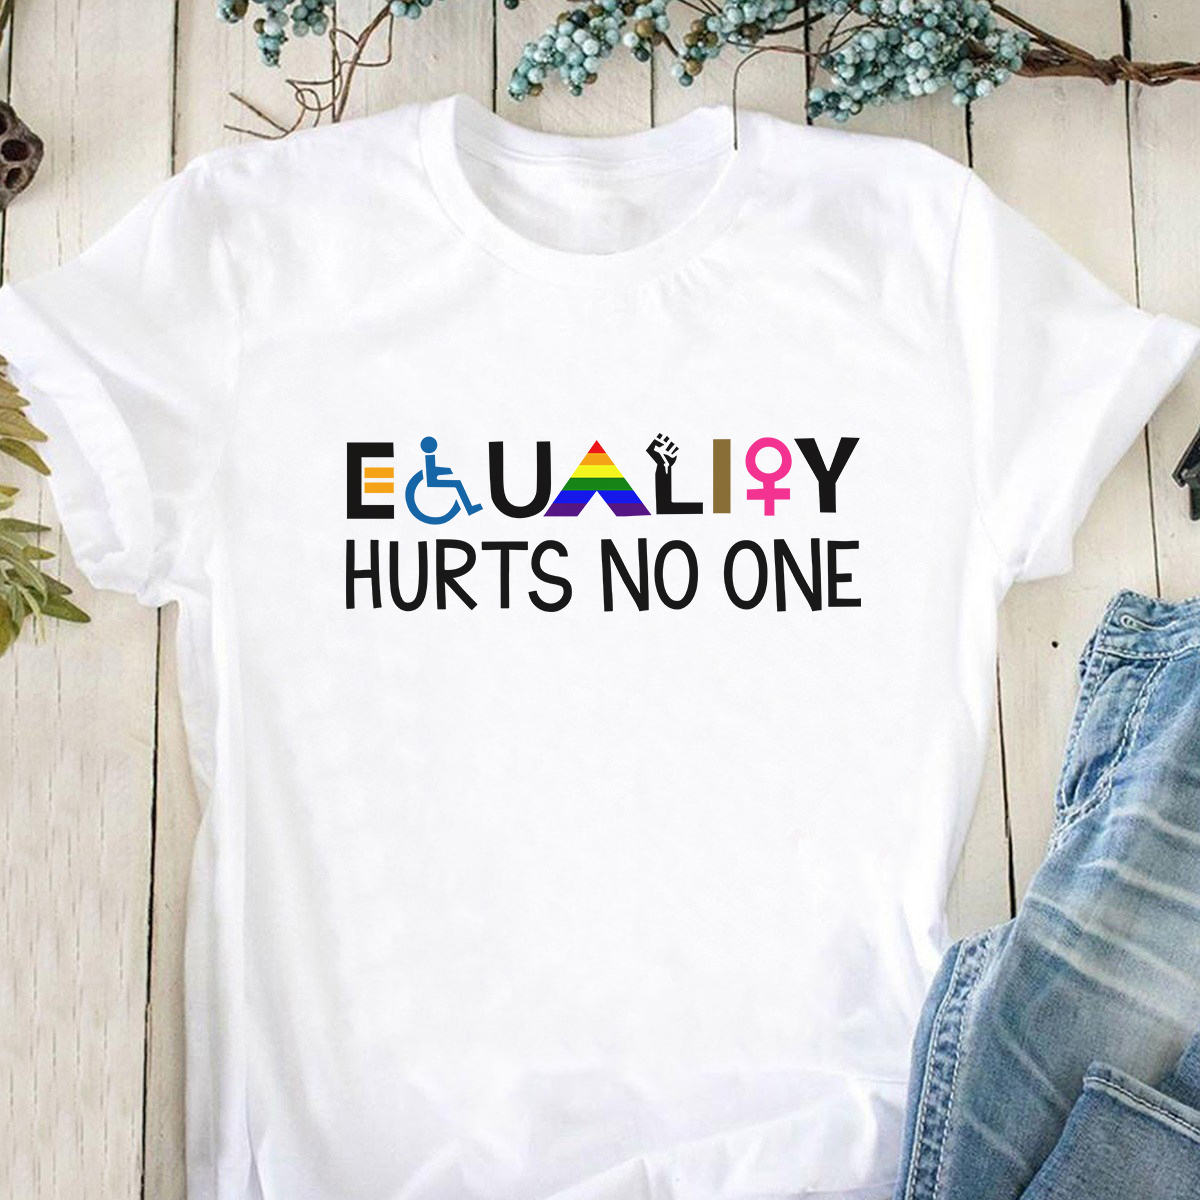 Equality hurts no one - Lgbt community, disability community, feminist movement